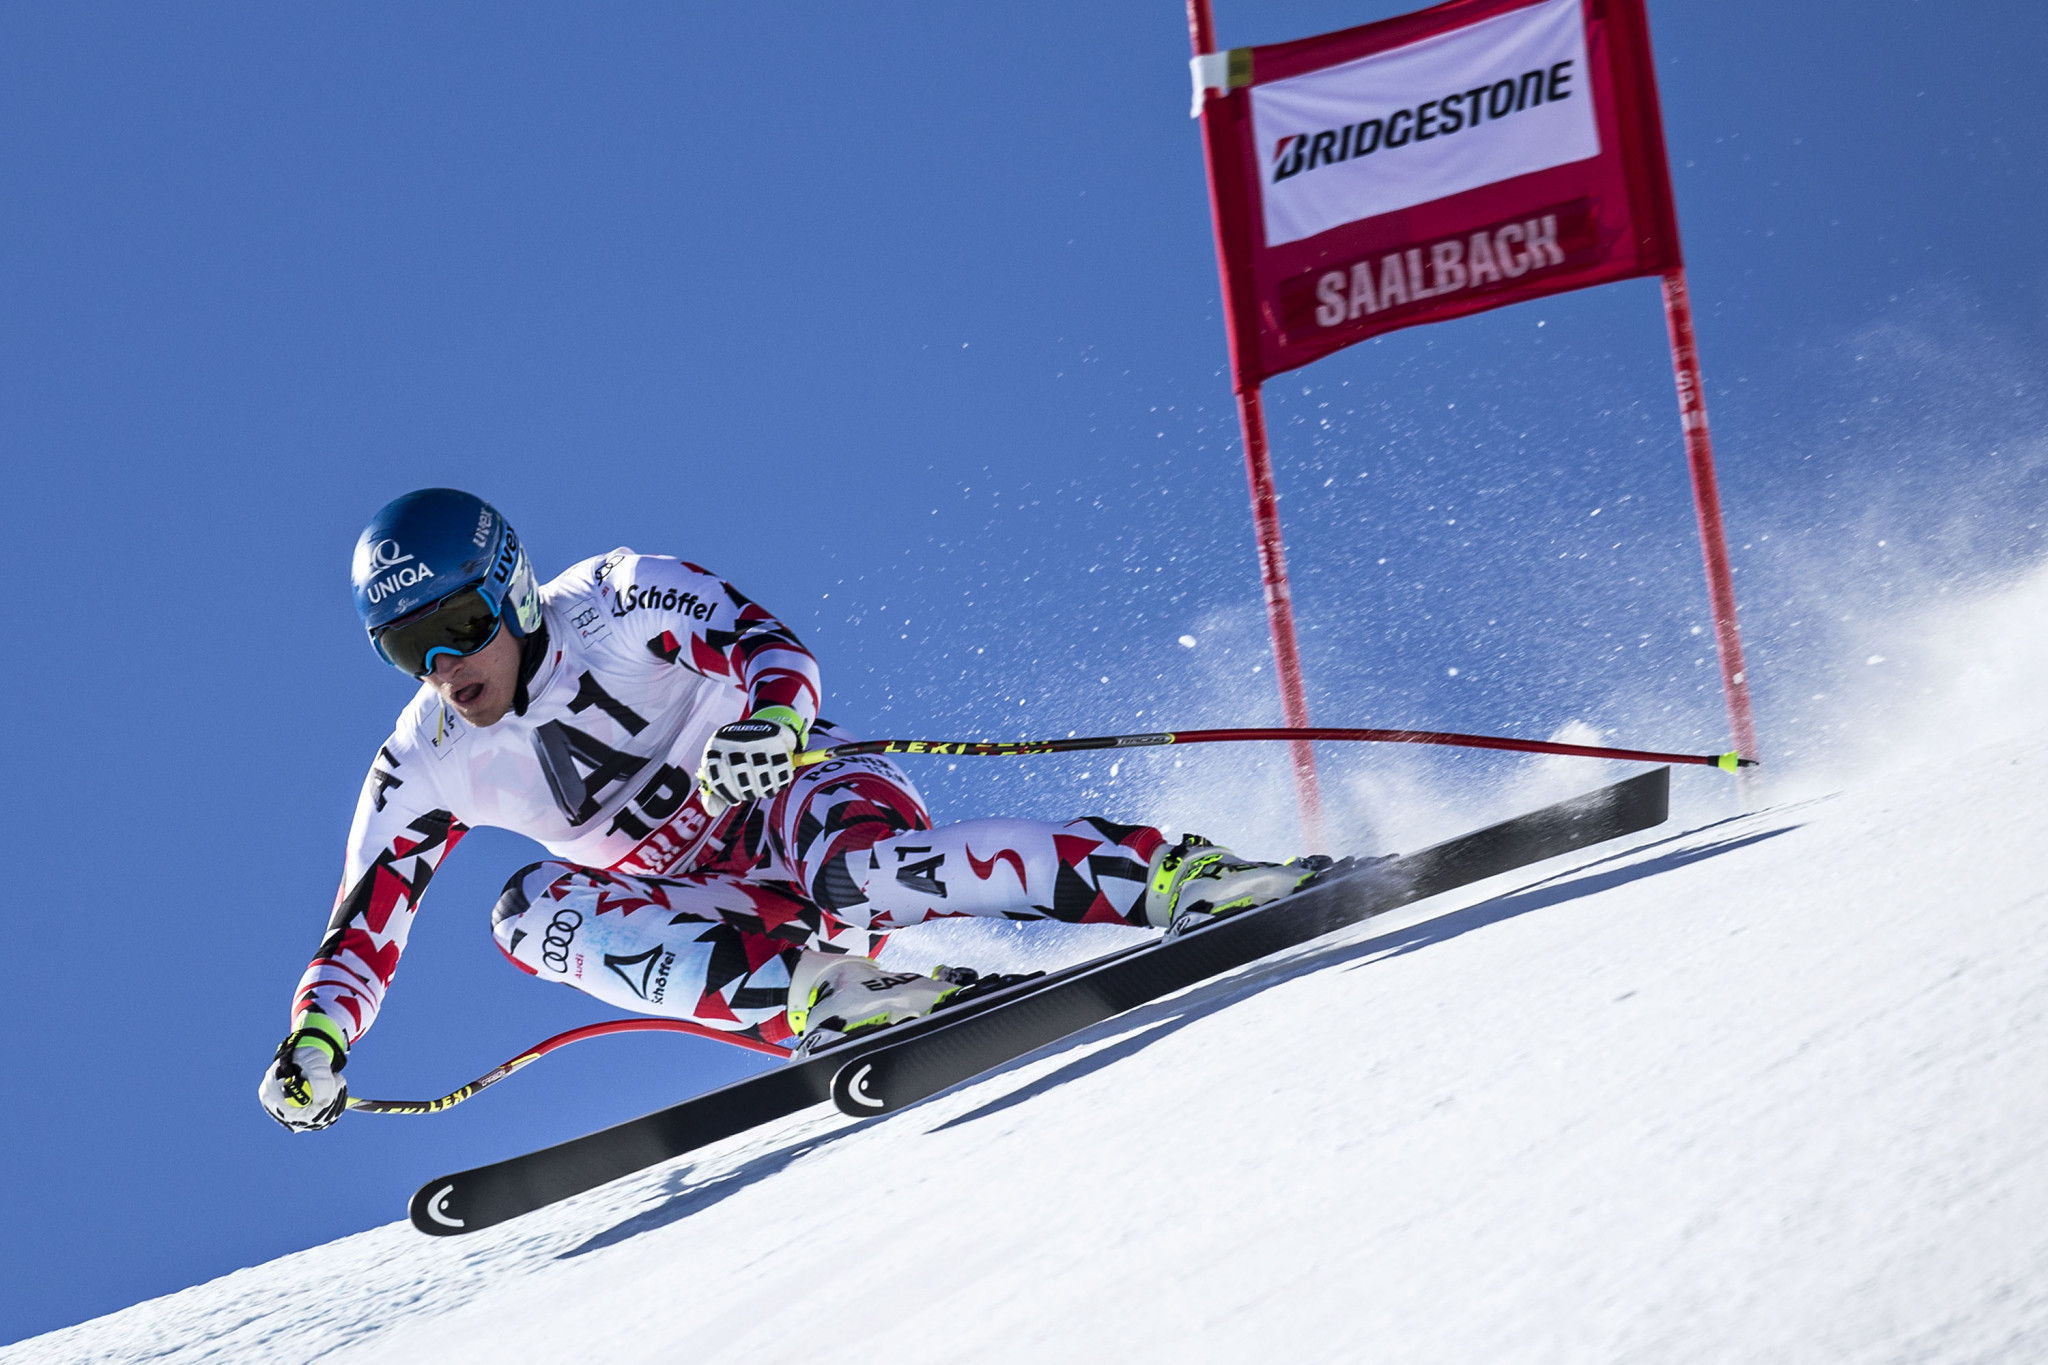 Saalbach in Austria has been selected to host the 2025 Alpine World Ski Championships ©Saalbach 2025